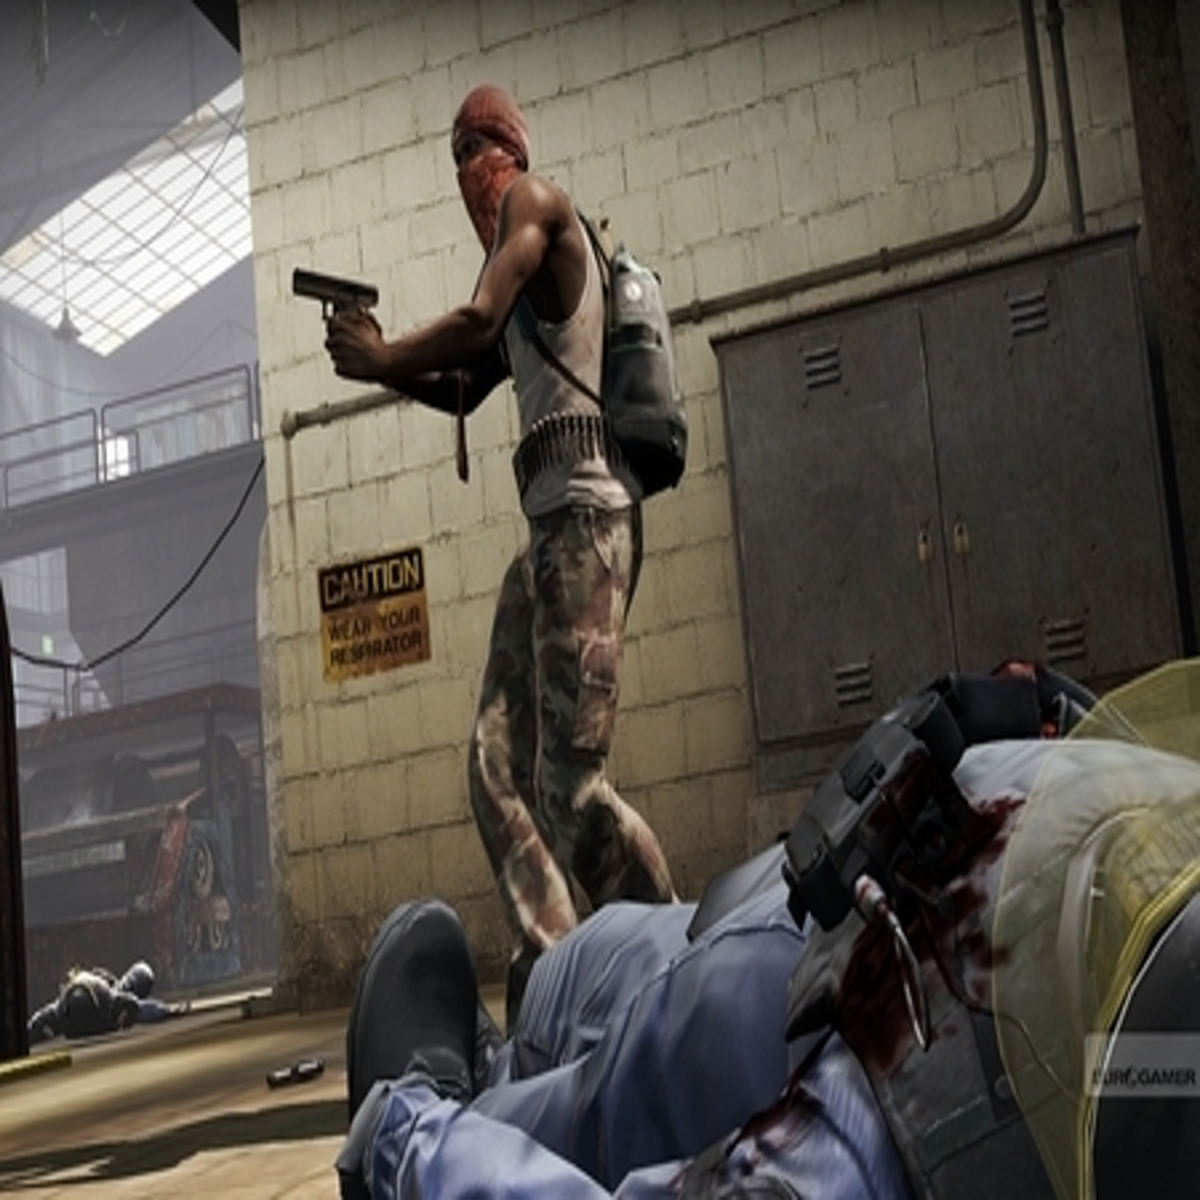 Counter-Strike: Global Offensive Coming to PSN August 21st –  PlayStation.Blog